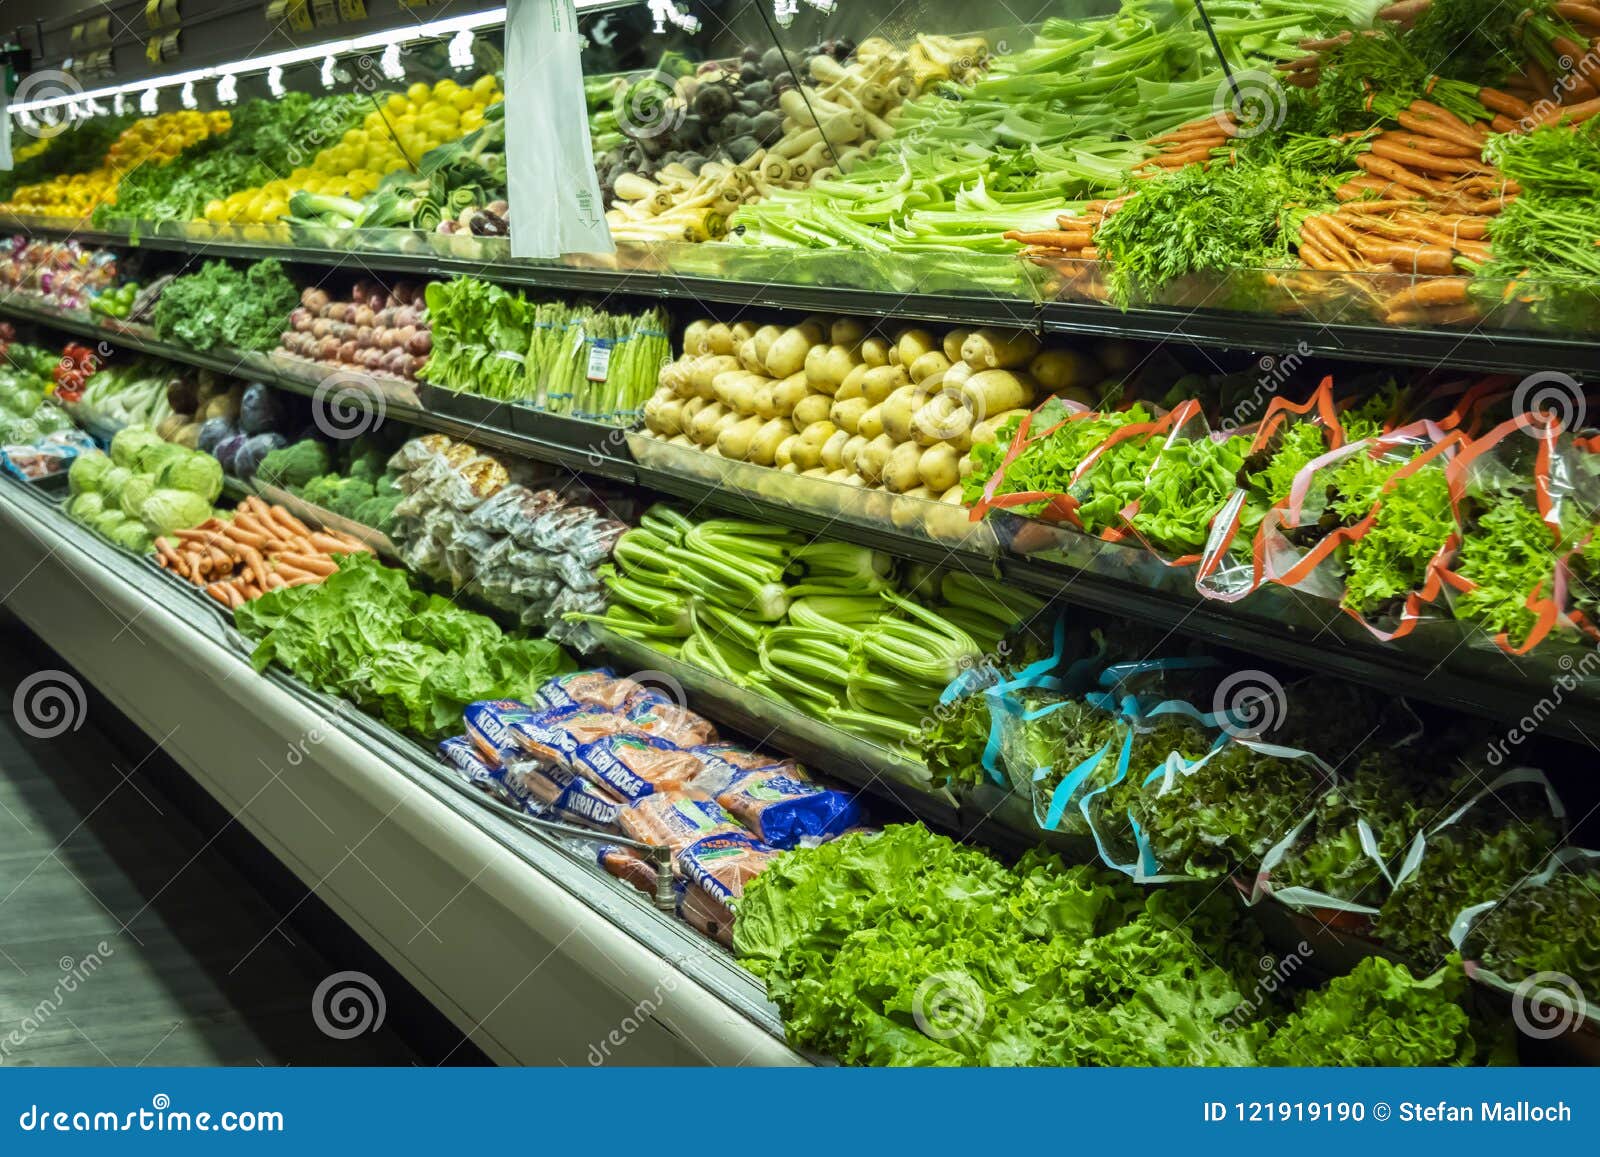 Lots of Vegetables in the Produce Aisle at a Supermarket Stock Photo -  Image of food, grocery: 121919190